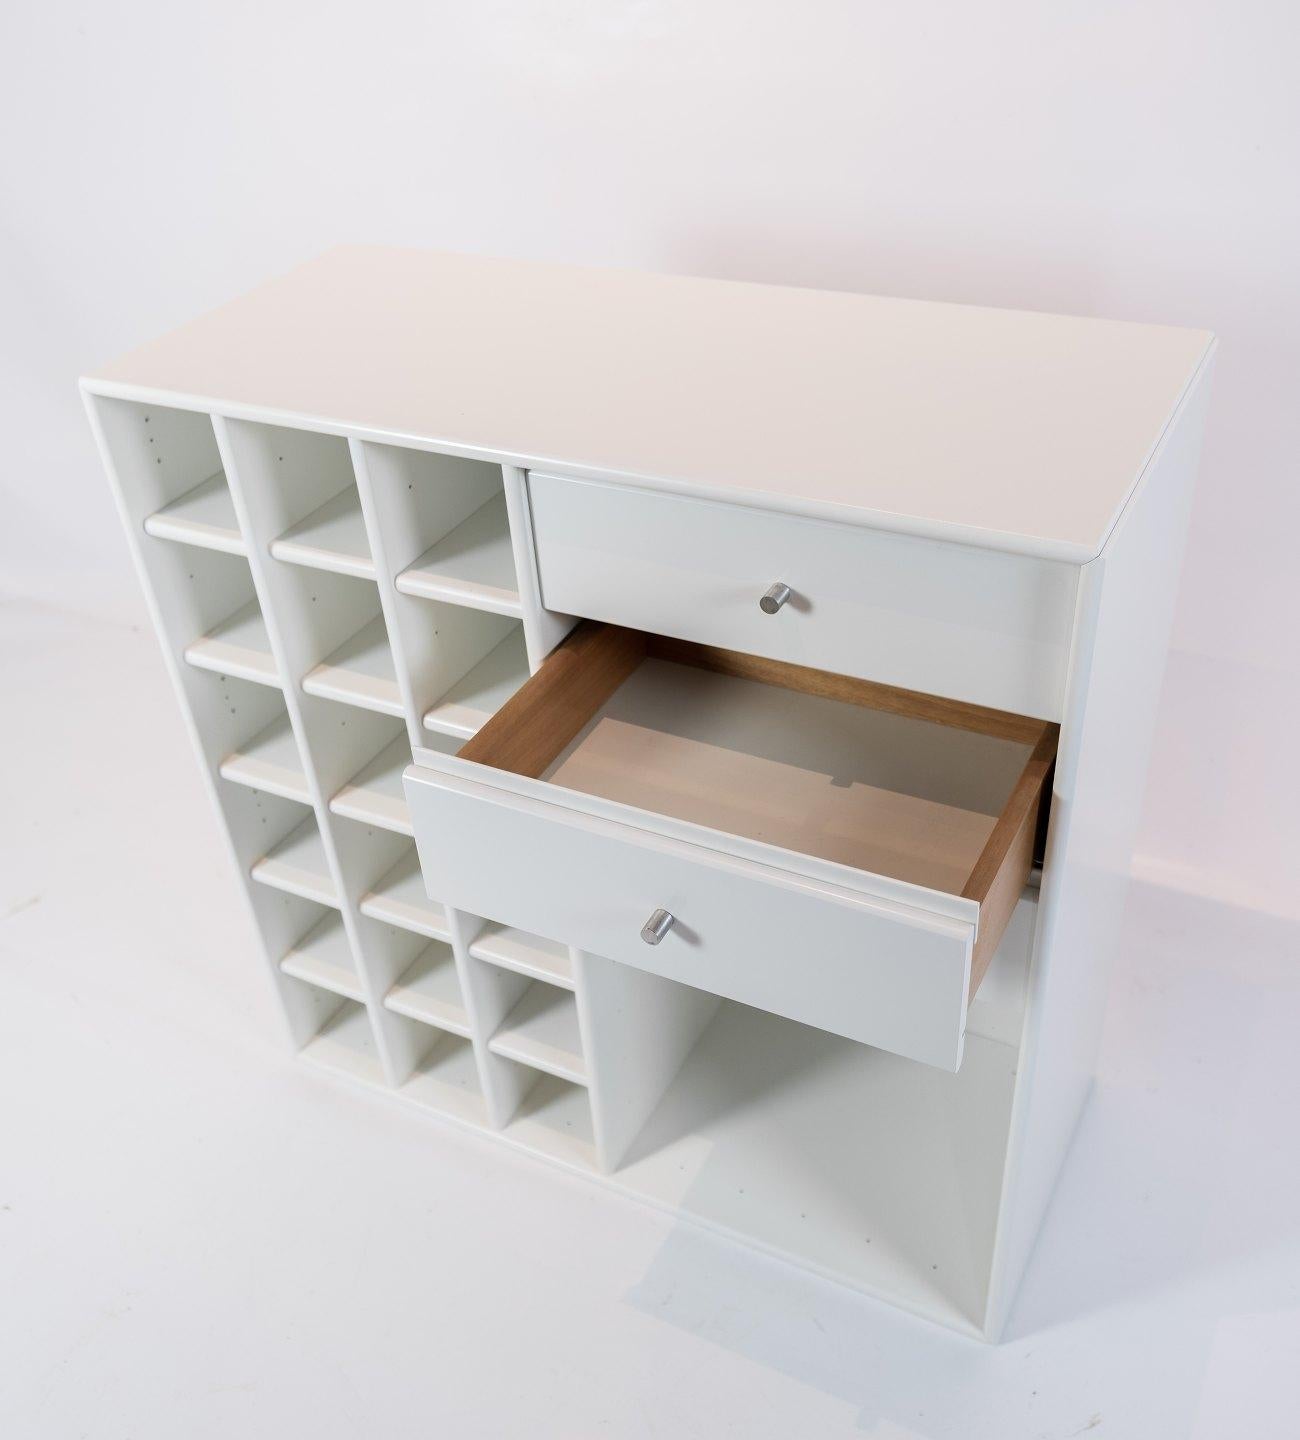 Large white Montana module with drawers and 18 smaller shelves, designed by Peter J. Lassen.